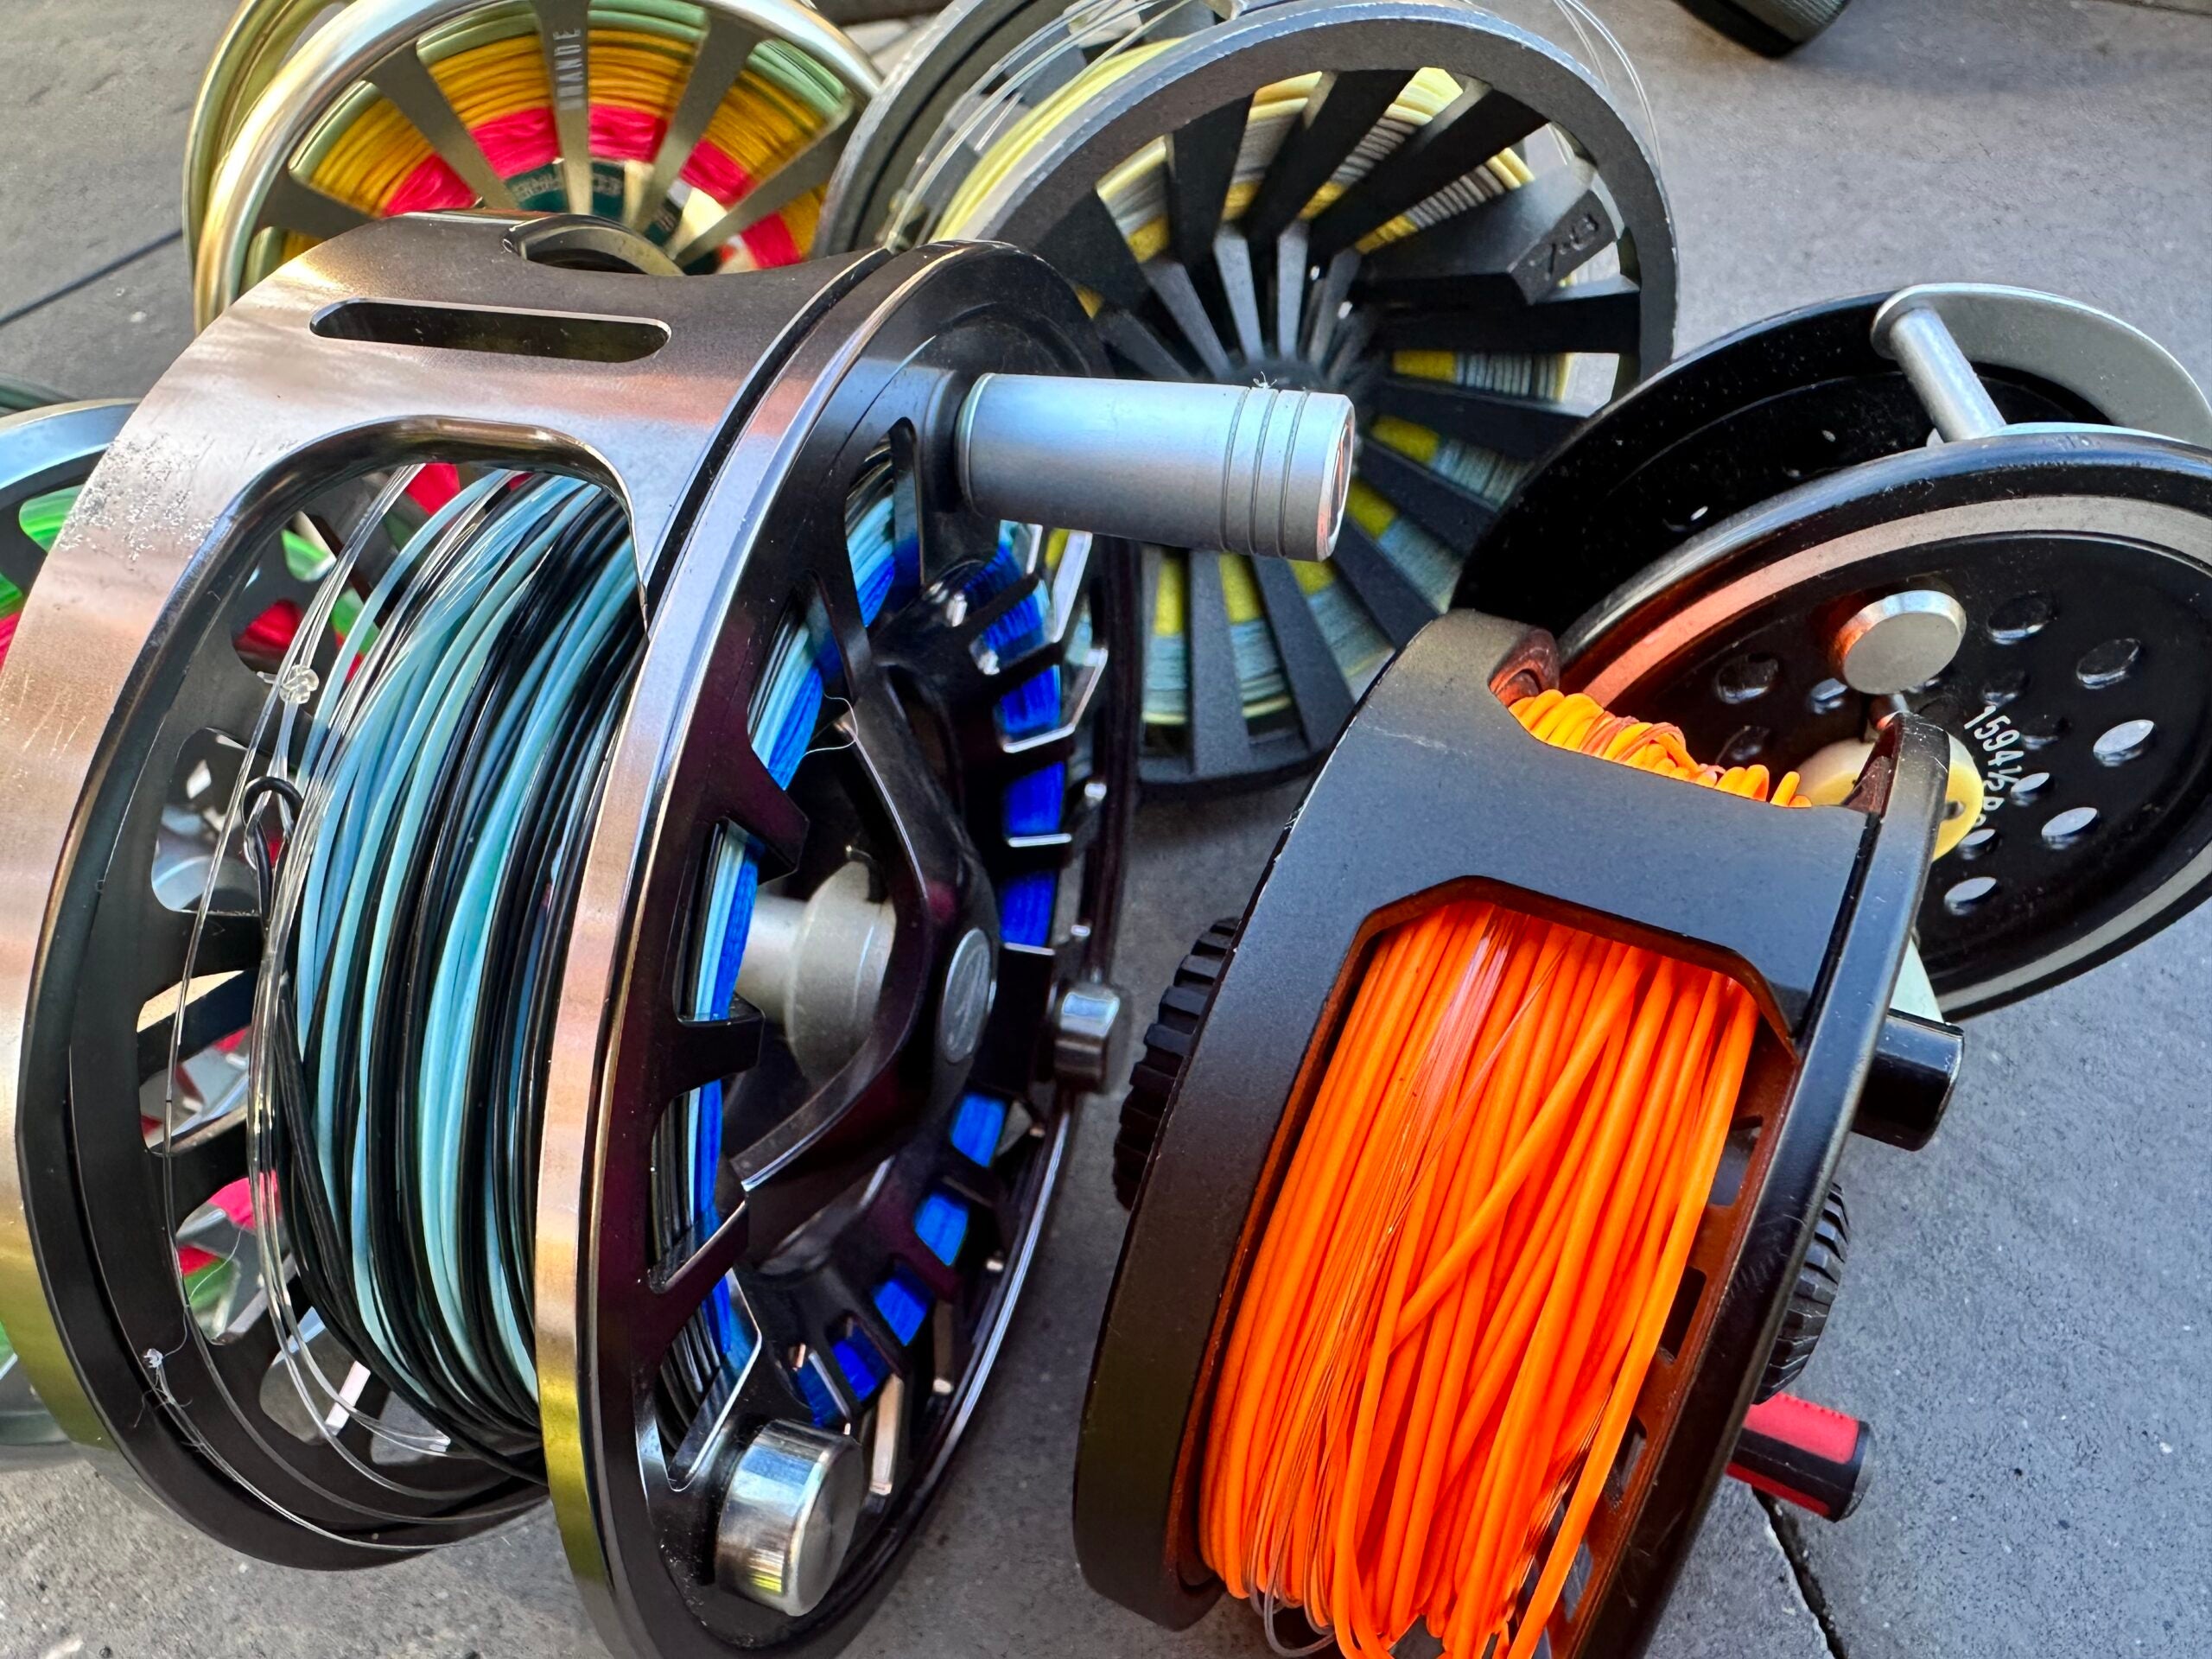 Five fly fishing reels with brightly colored fly lines are arranged on a table.